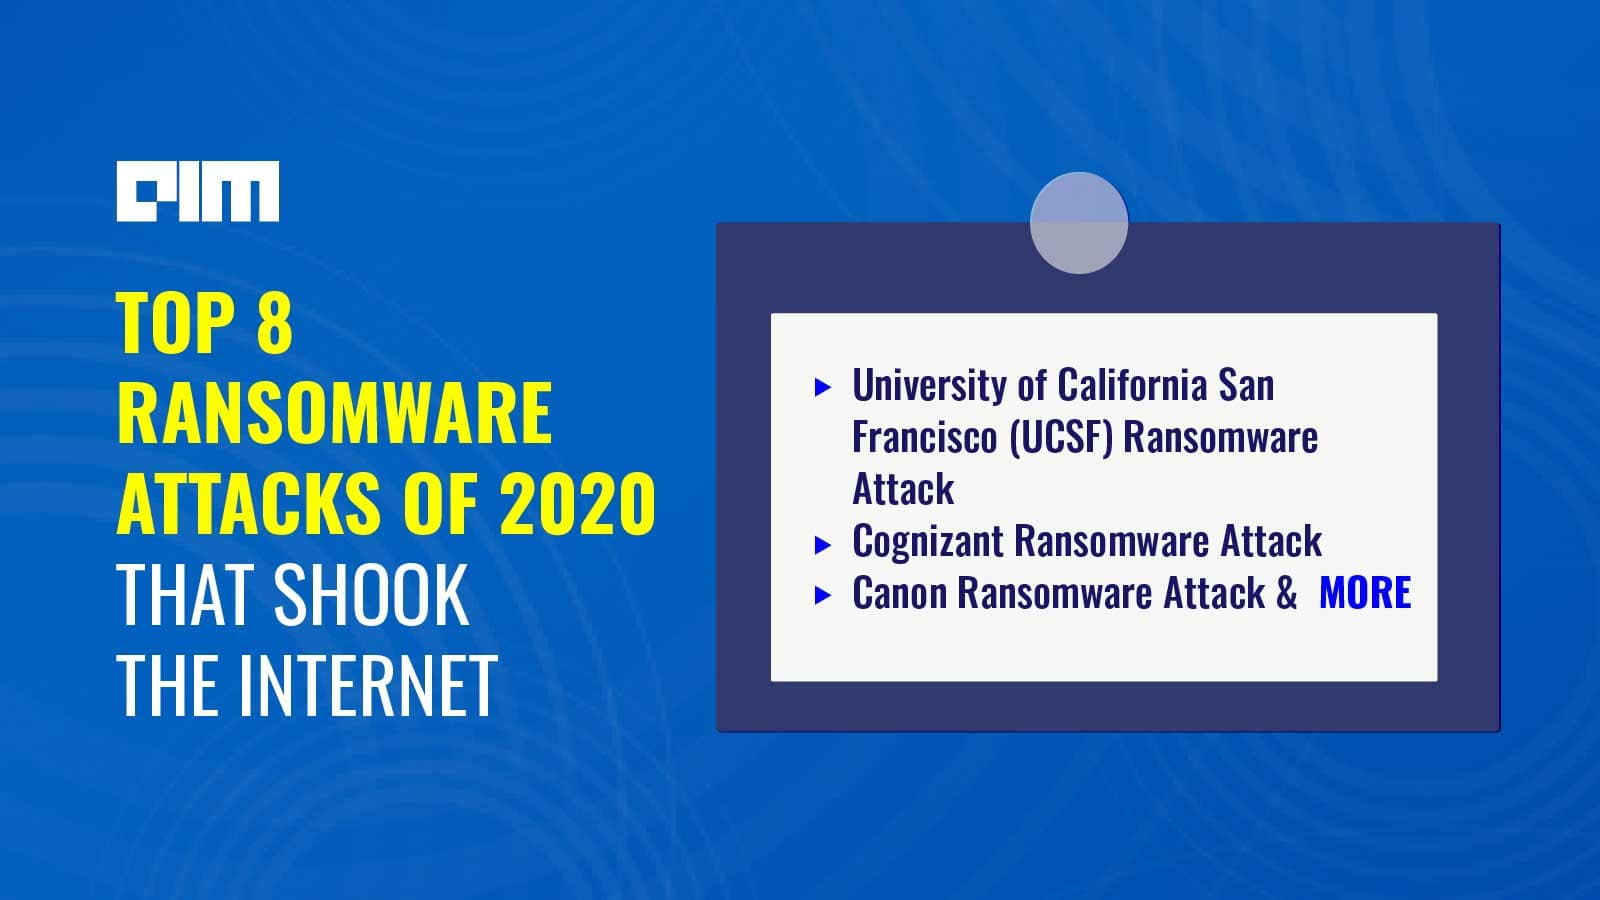 Top 8 Ransomware Attacks of 2020 That Shook The Internet